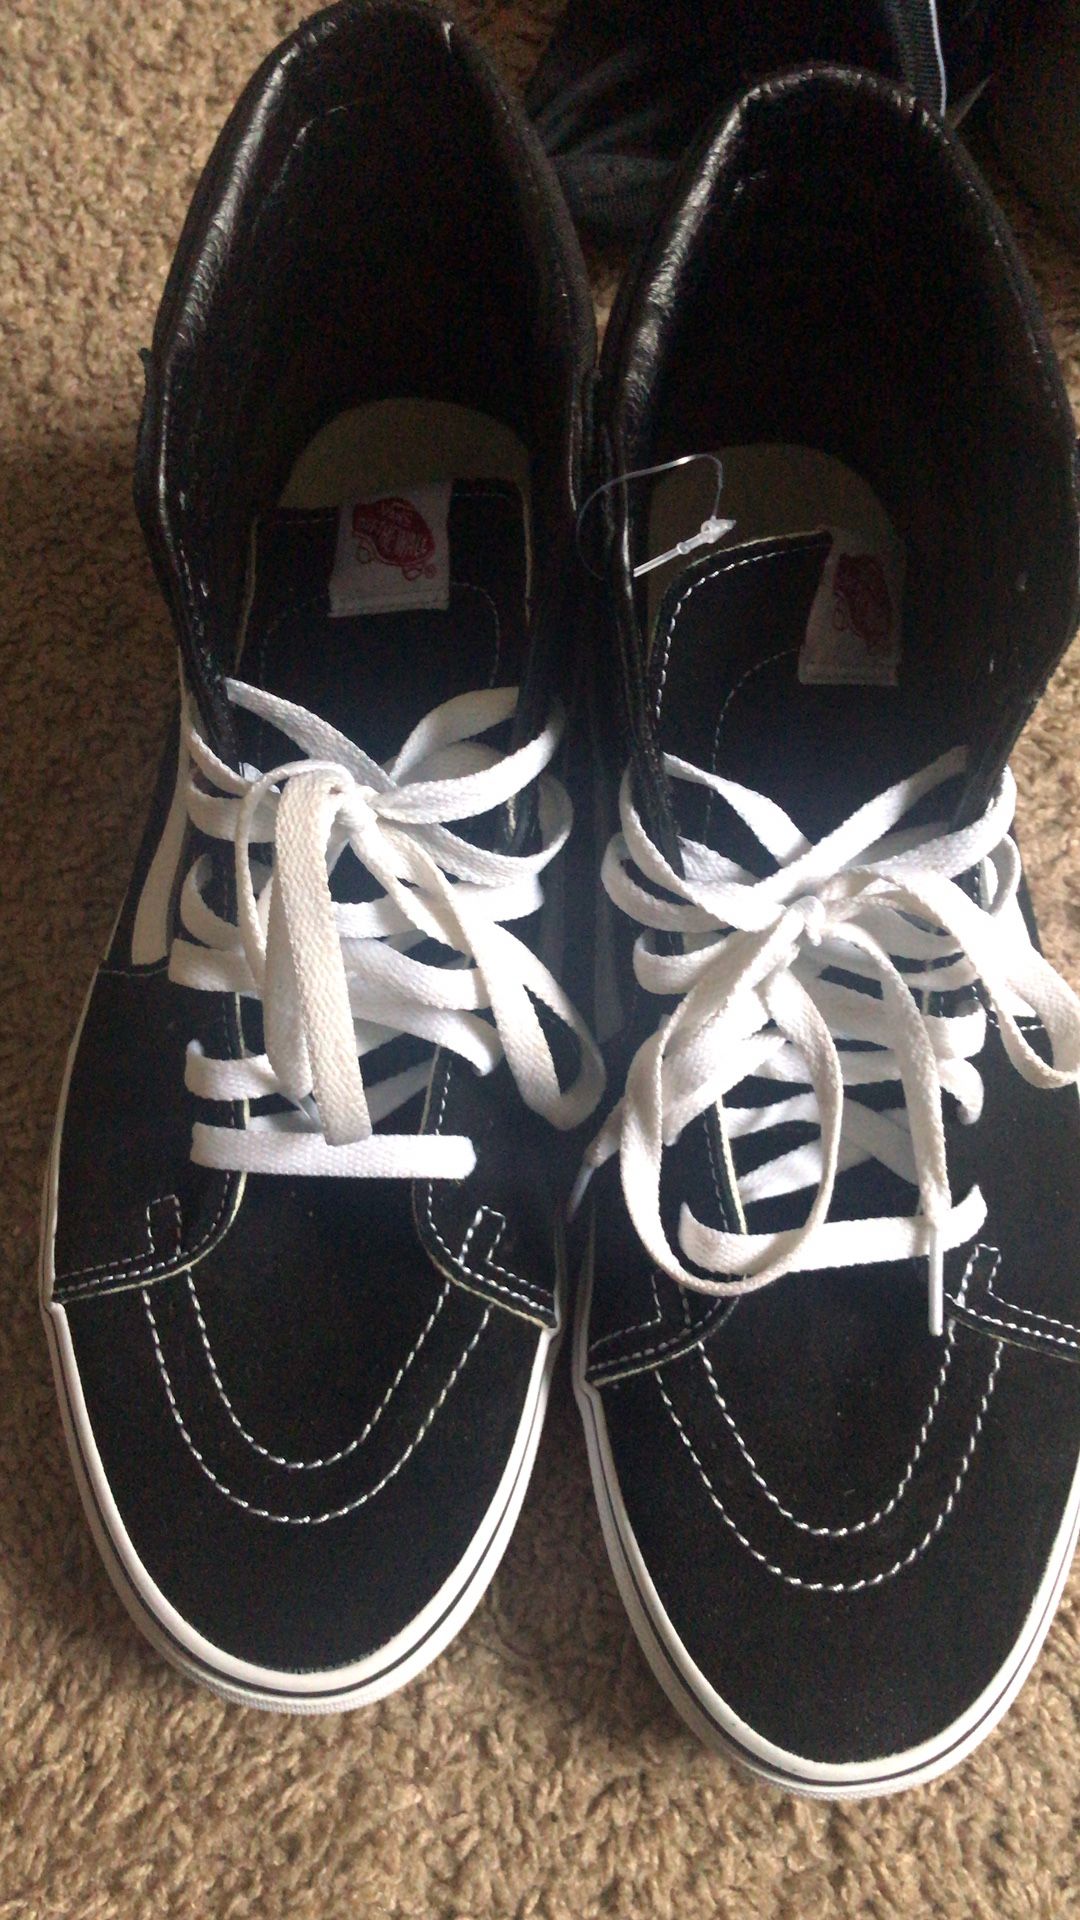 Size 11.5 vans quick sell